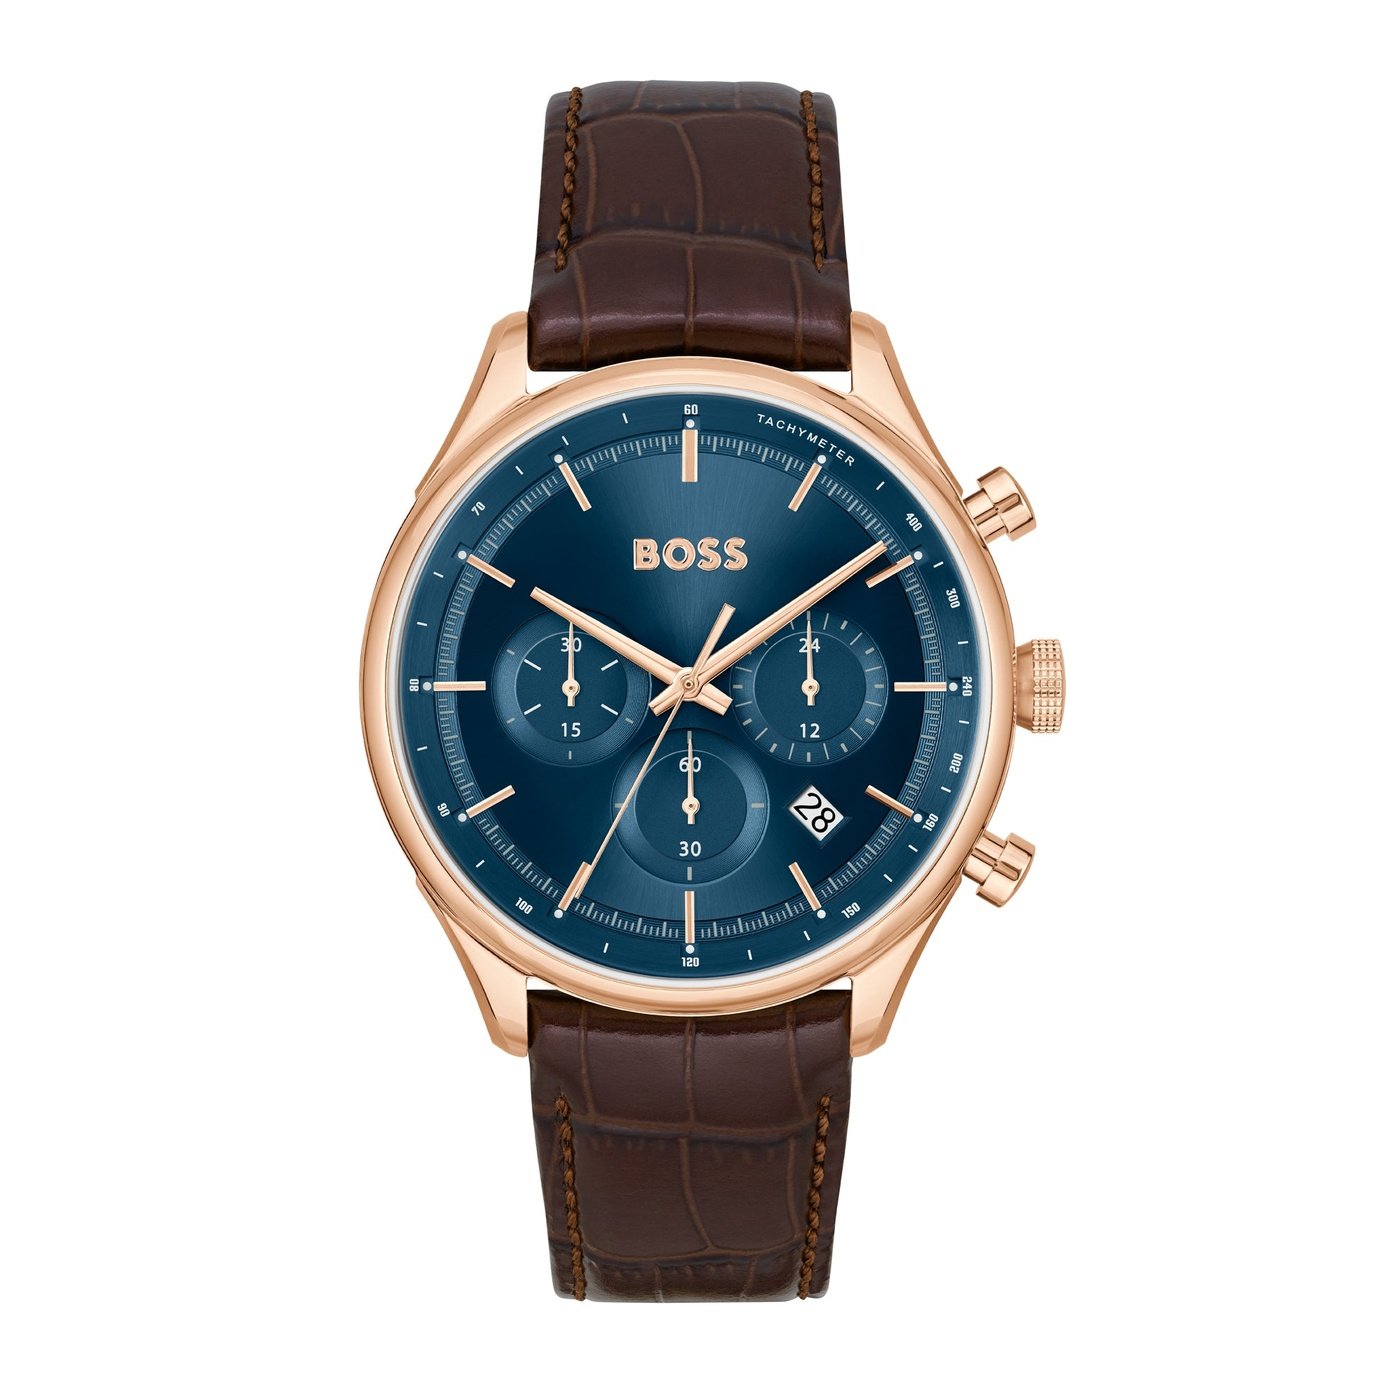 For BOSS Watches Women Online HUGO Now Shop | Men And